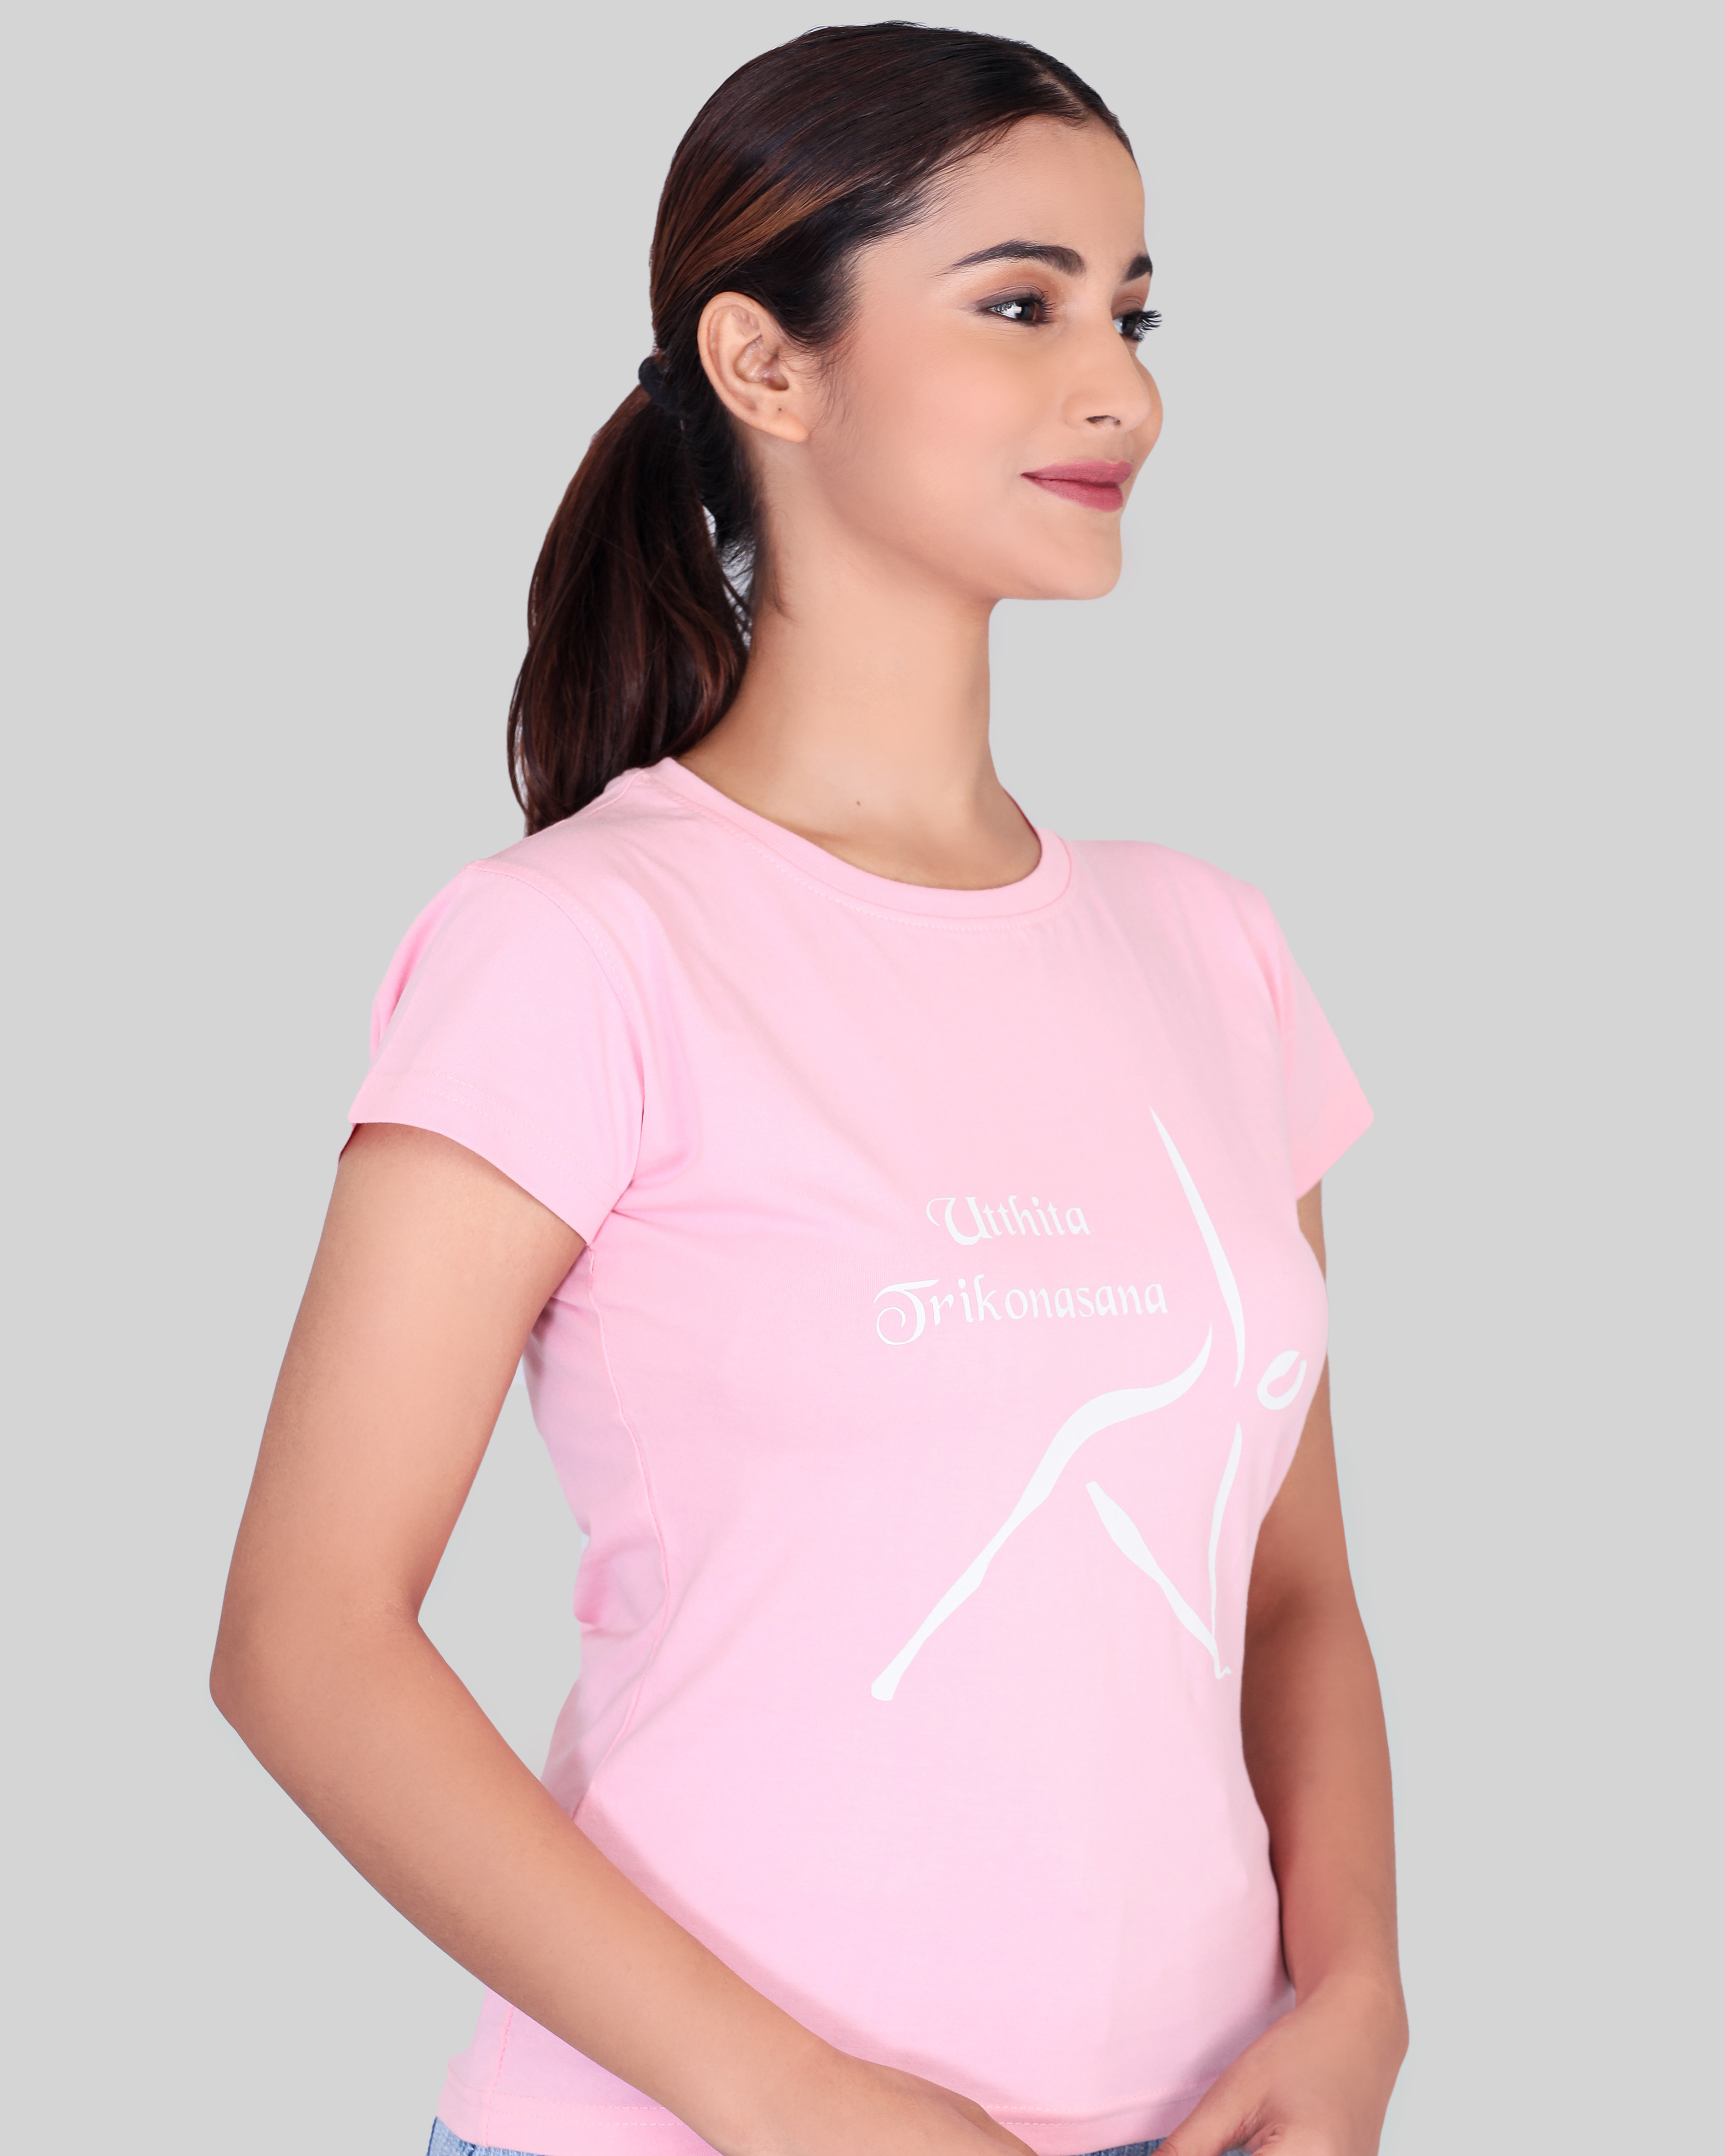 Pink single jersey round neck t-shirts with company logo